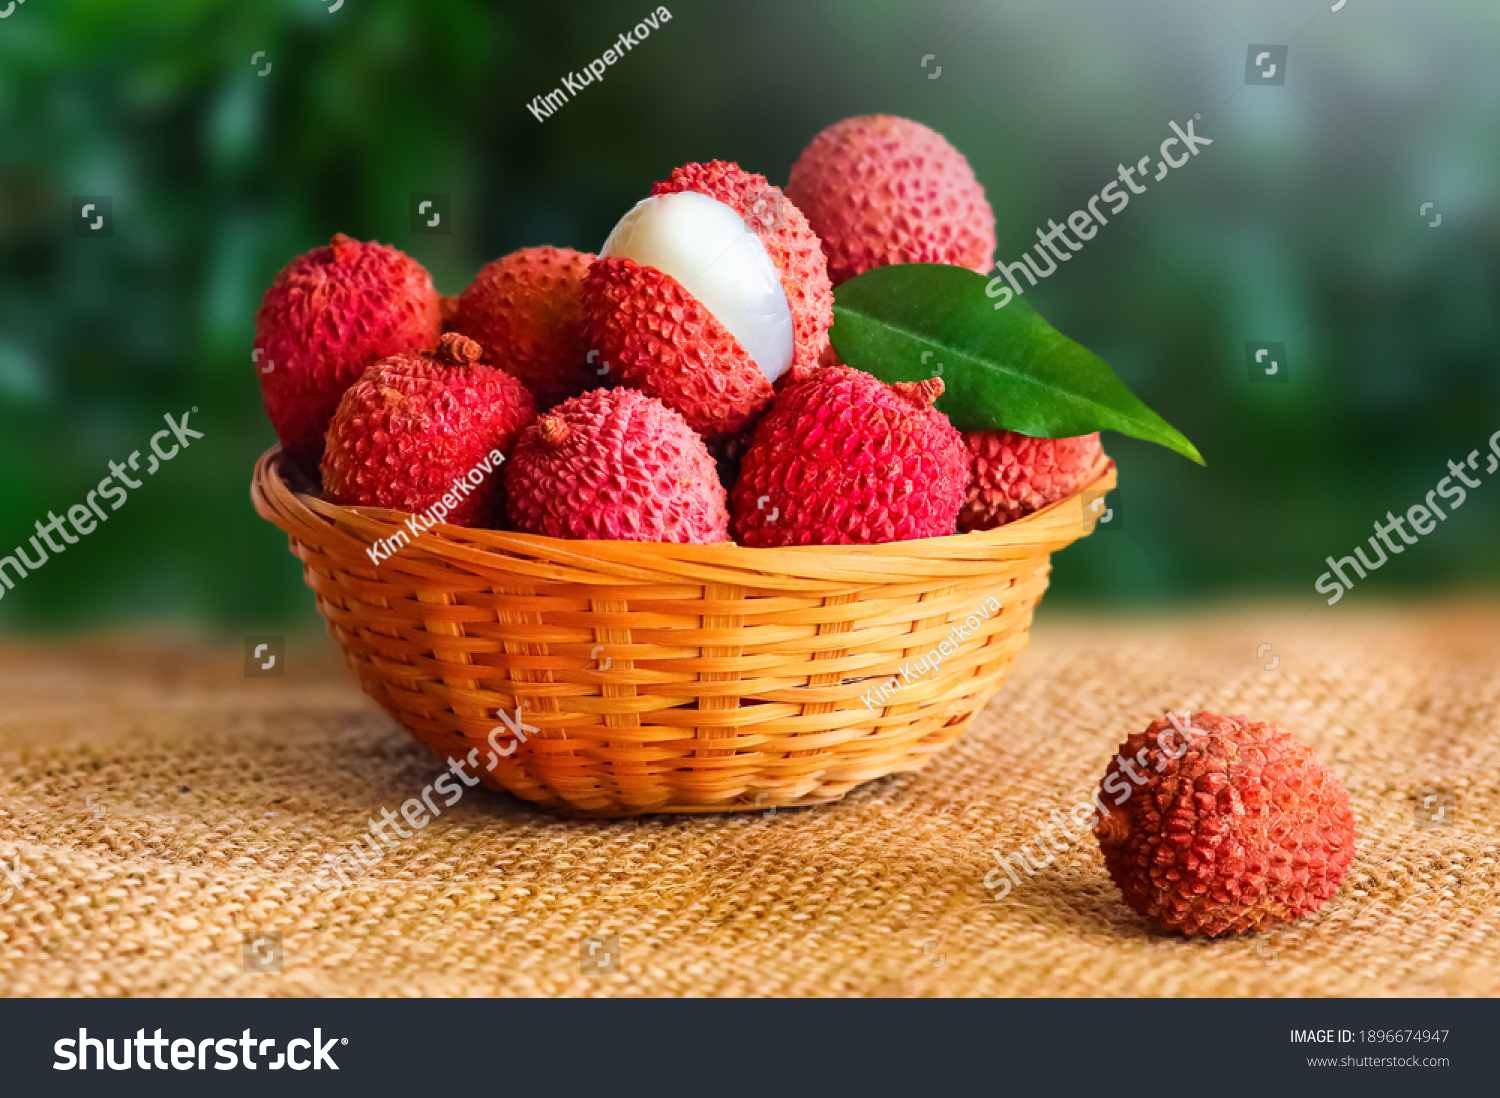 Front view of fresh ripe lychee fruit and peeled lychee with green leaves on wooden bowl and blur garden background.  #1896674947